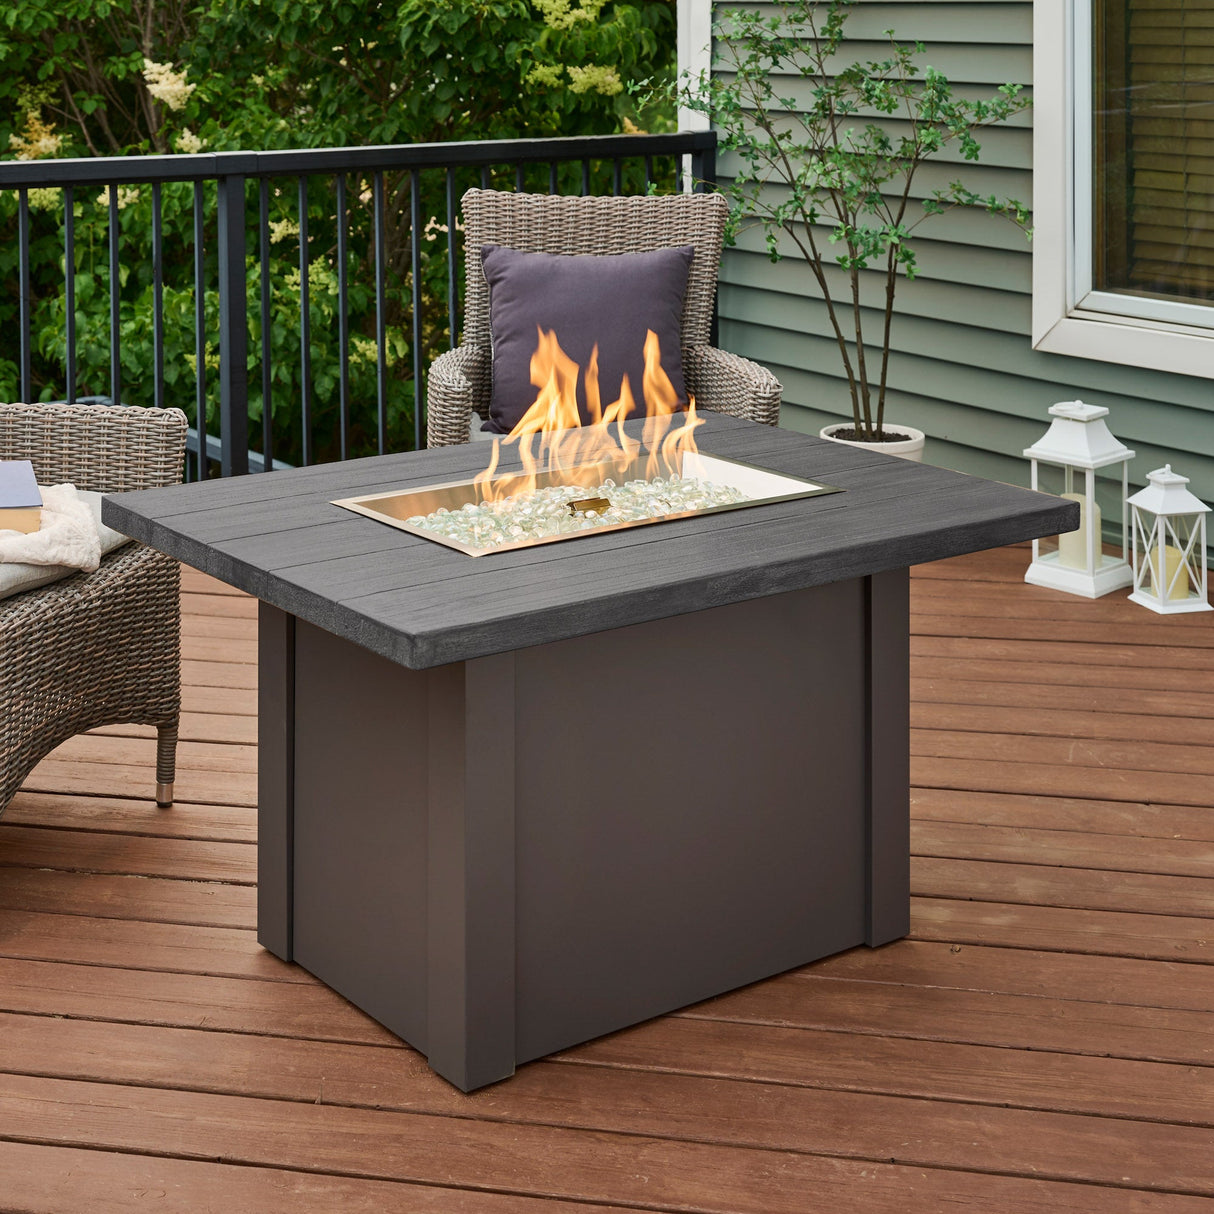 A large flame coming from the burner of a Havenwood Rectangular Gas Fire Pit Table placed in the center of an outdoor deck